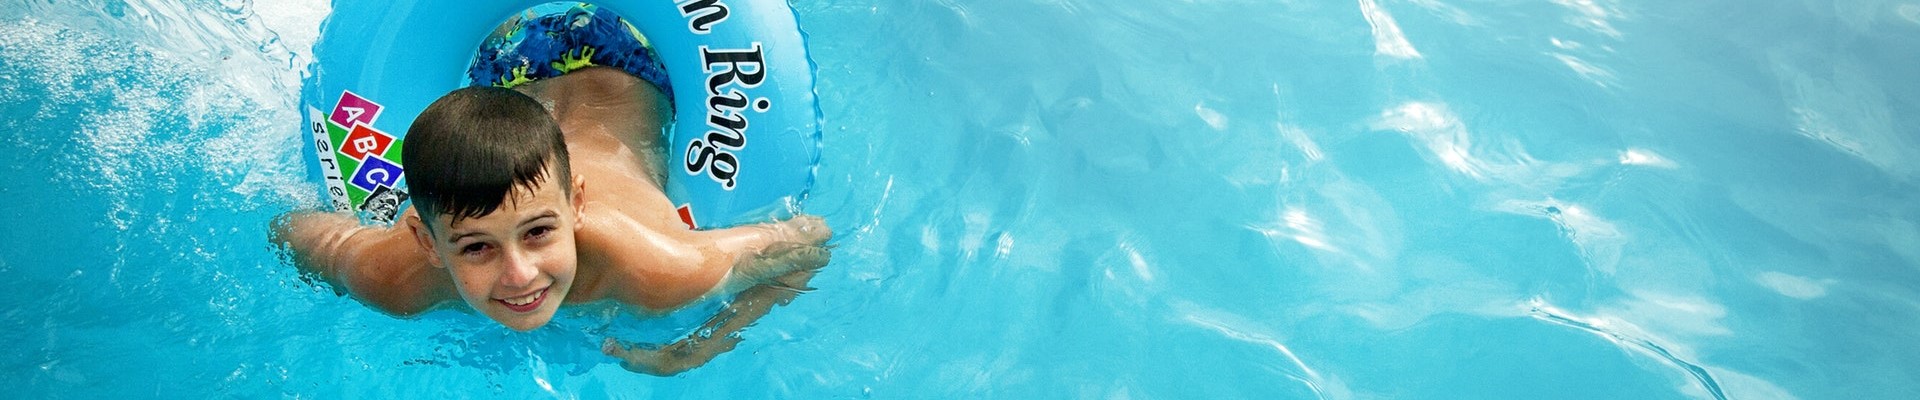 child swimming with a tube in the pool